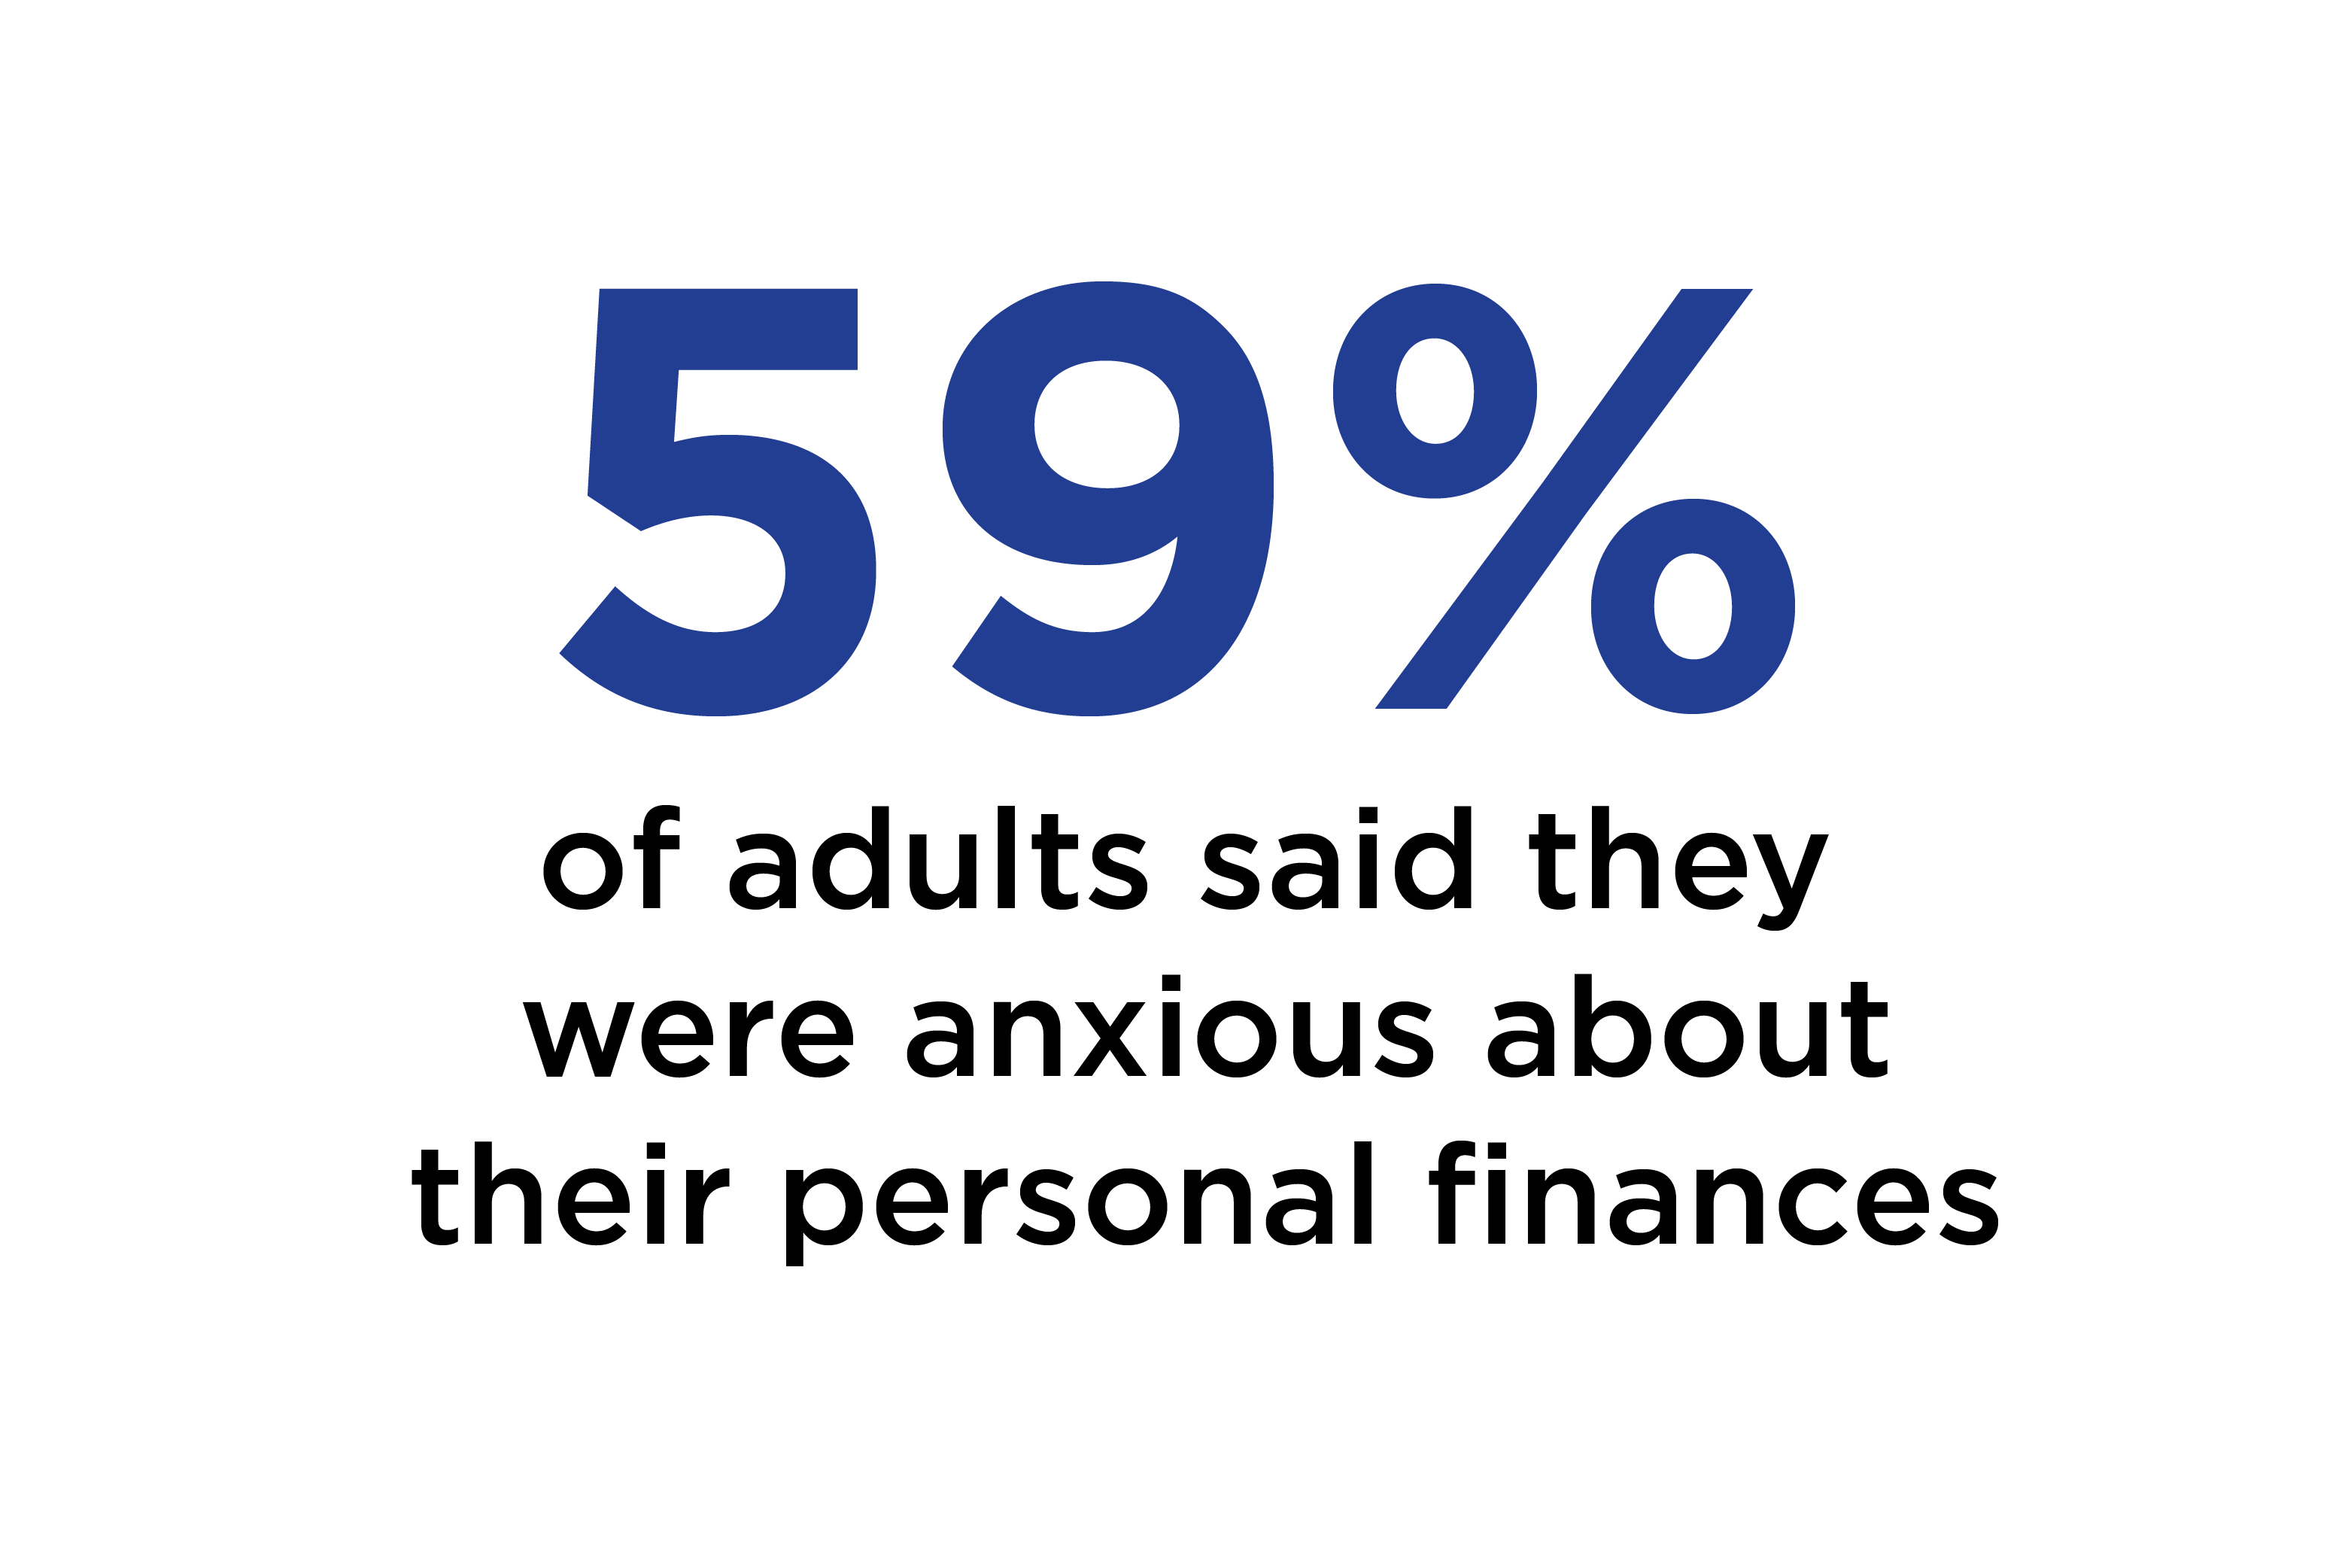 59% of adults said they were anxious about their personal finances